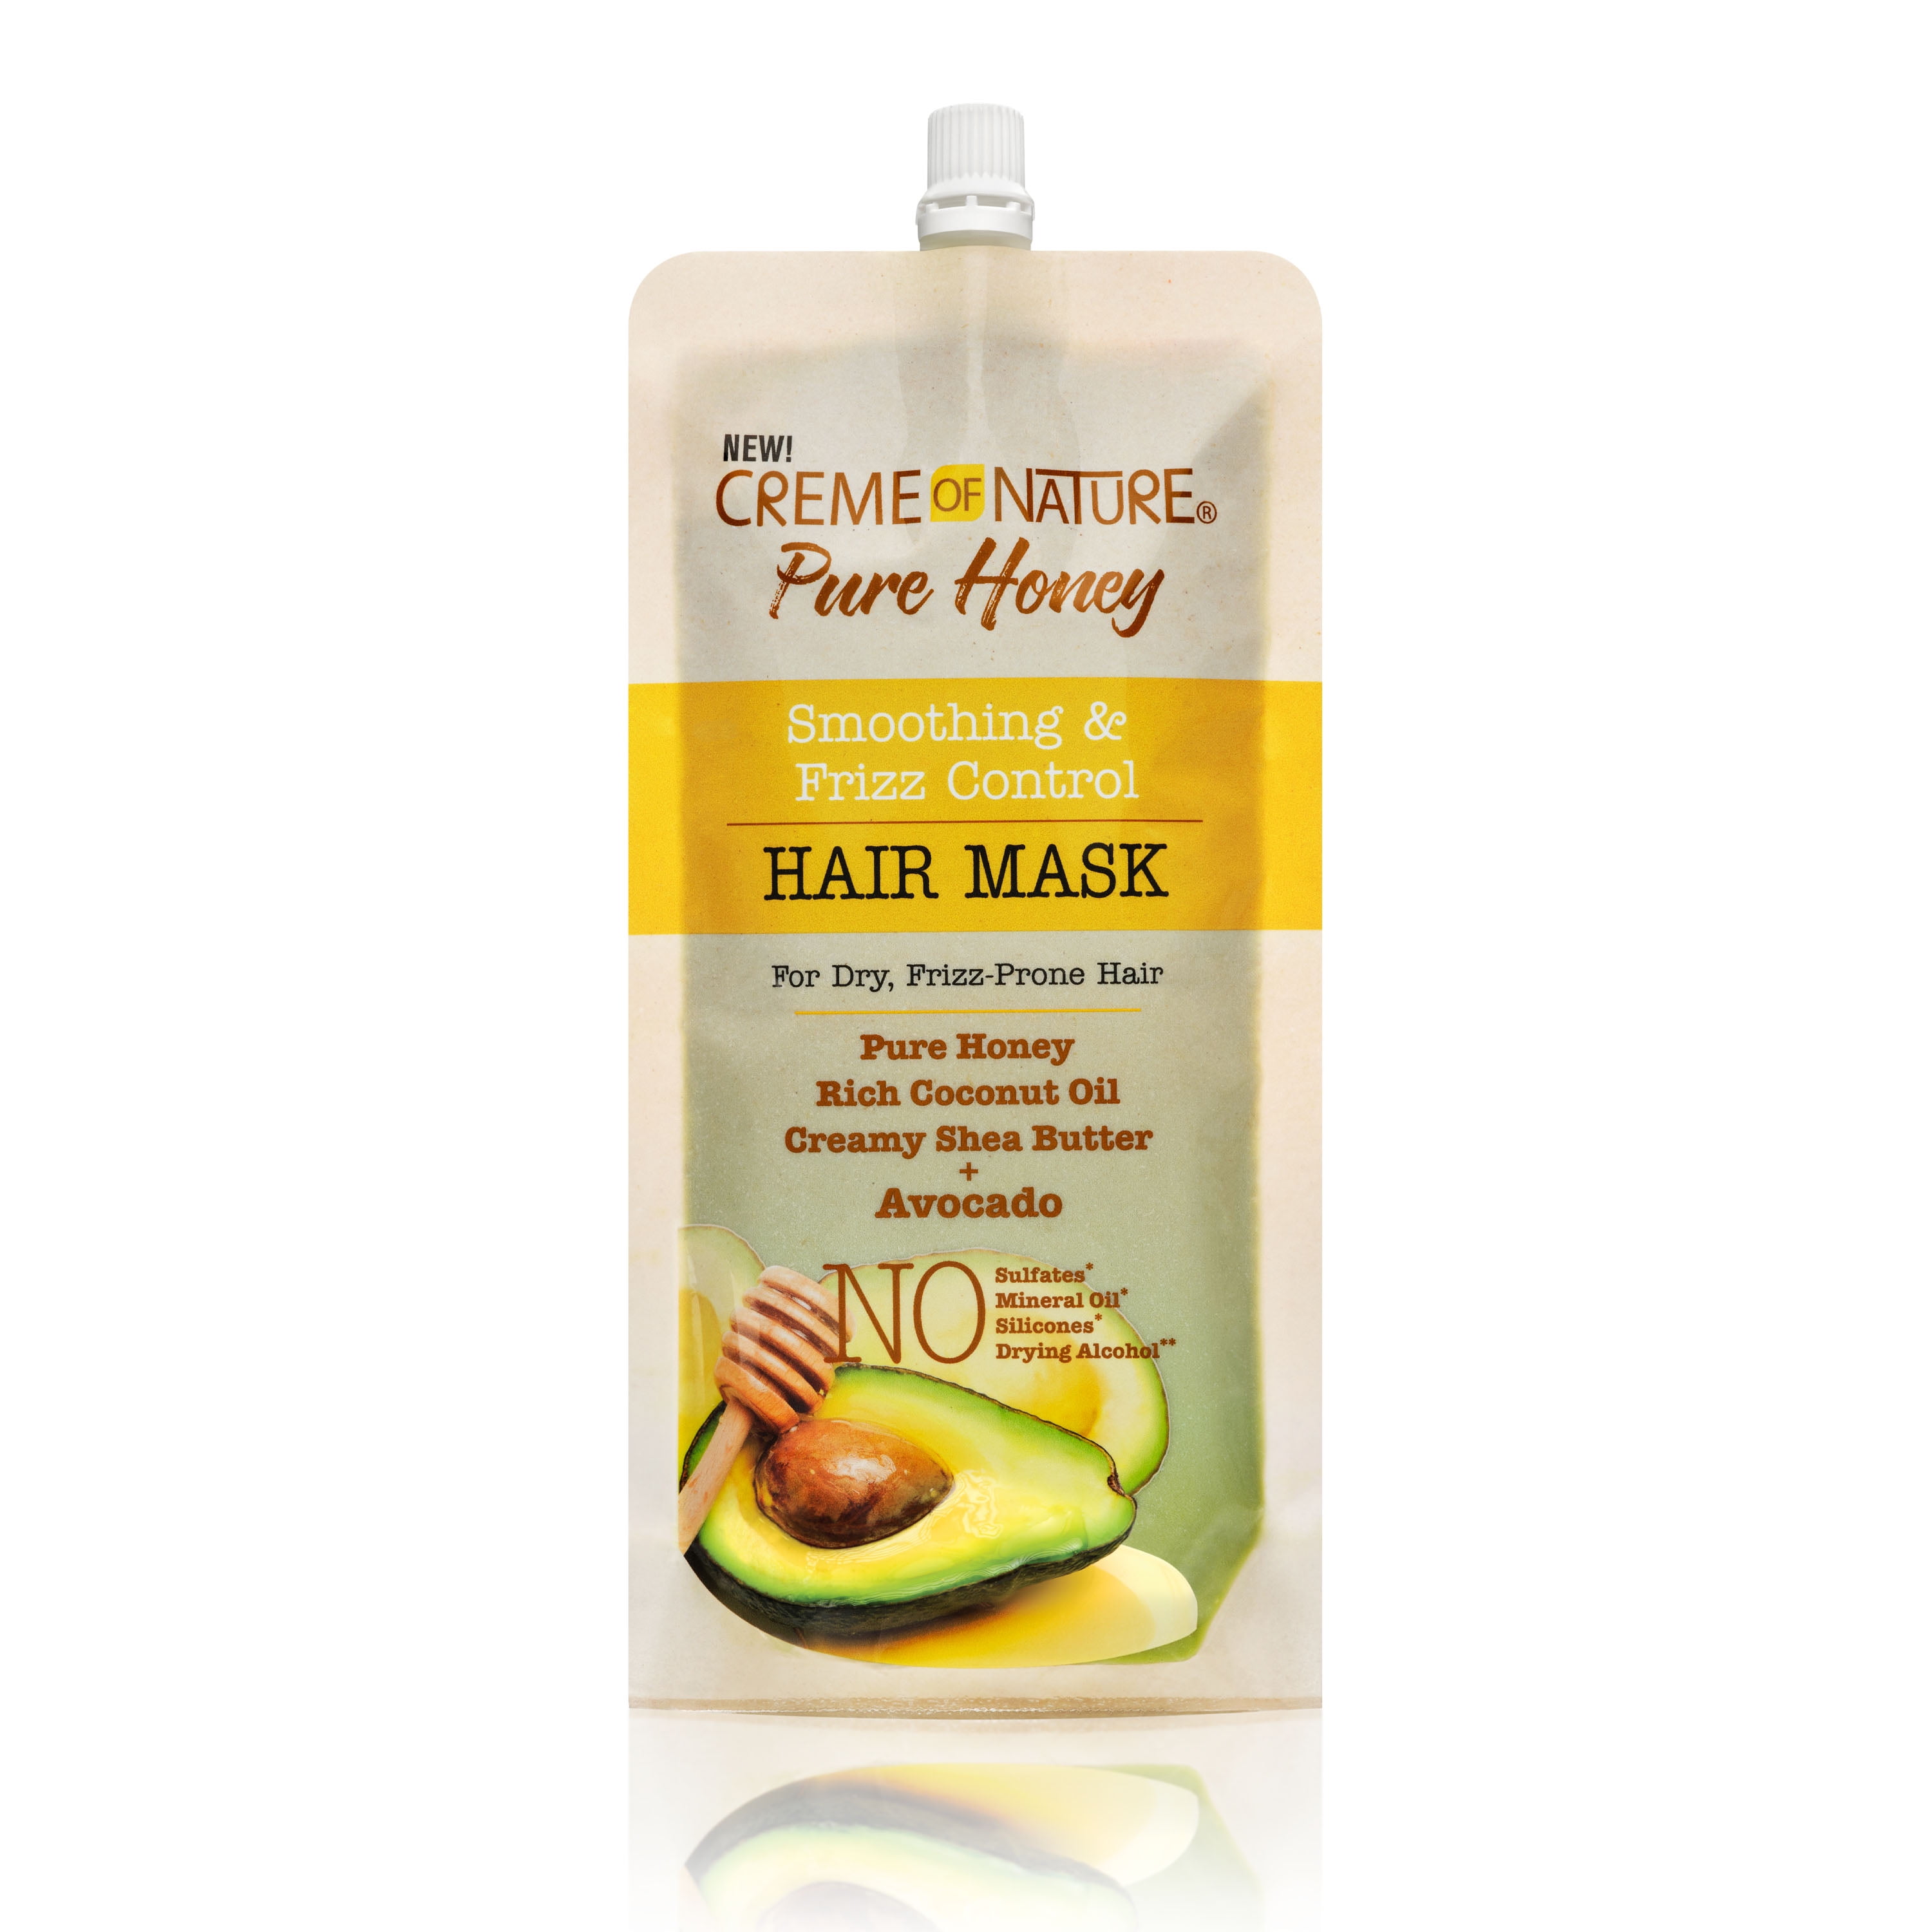 Creme of Nature Pure Honey Smoothing & Frizz Control Hair Mask  oz -  